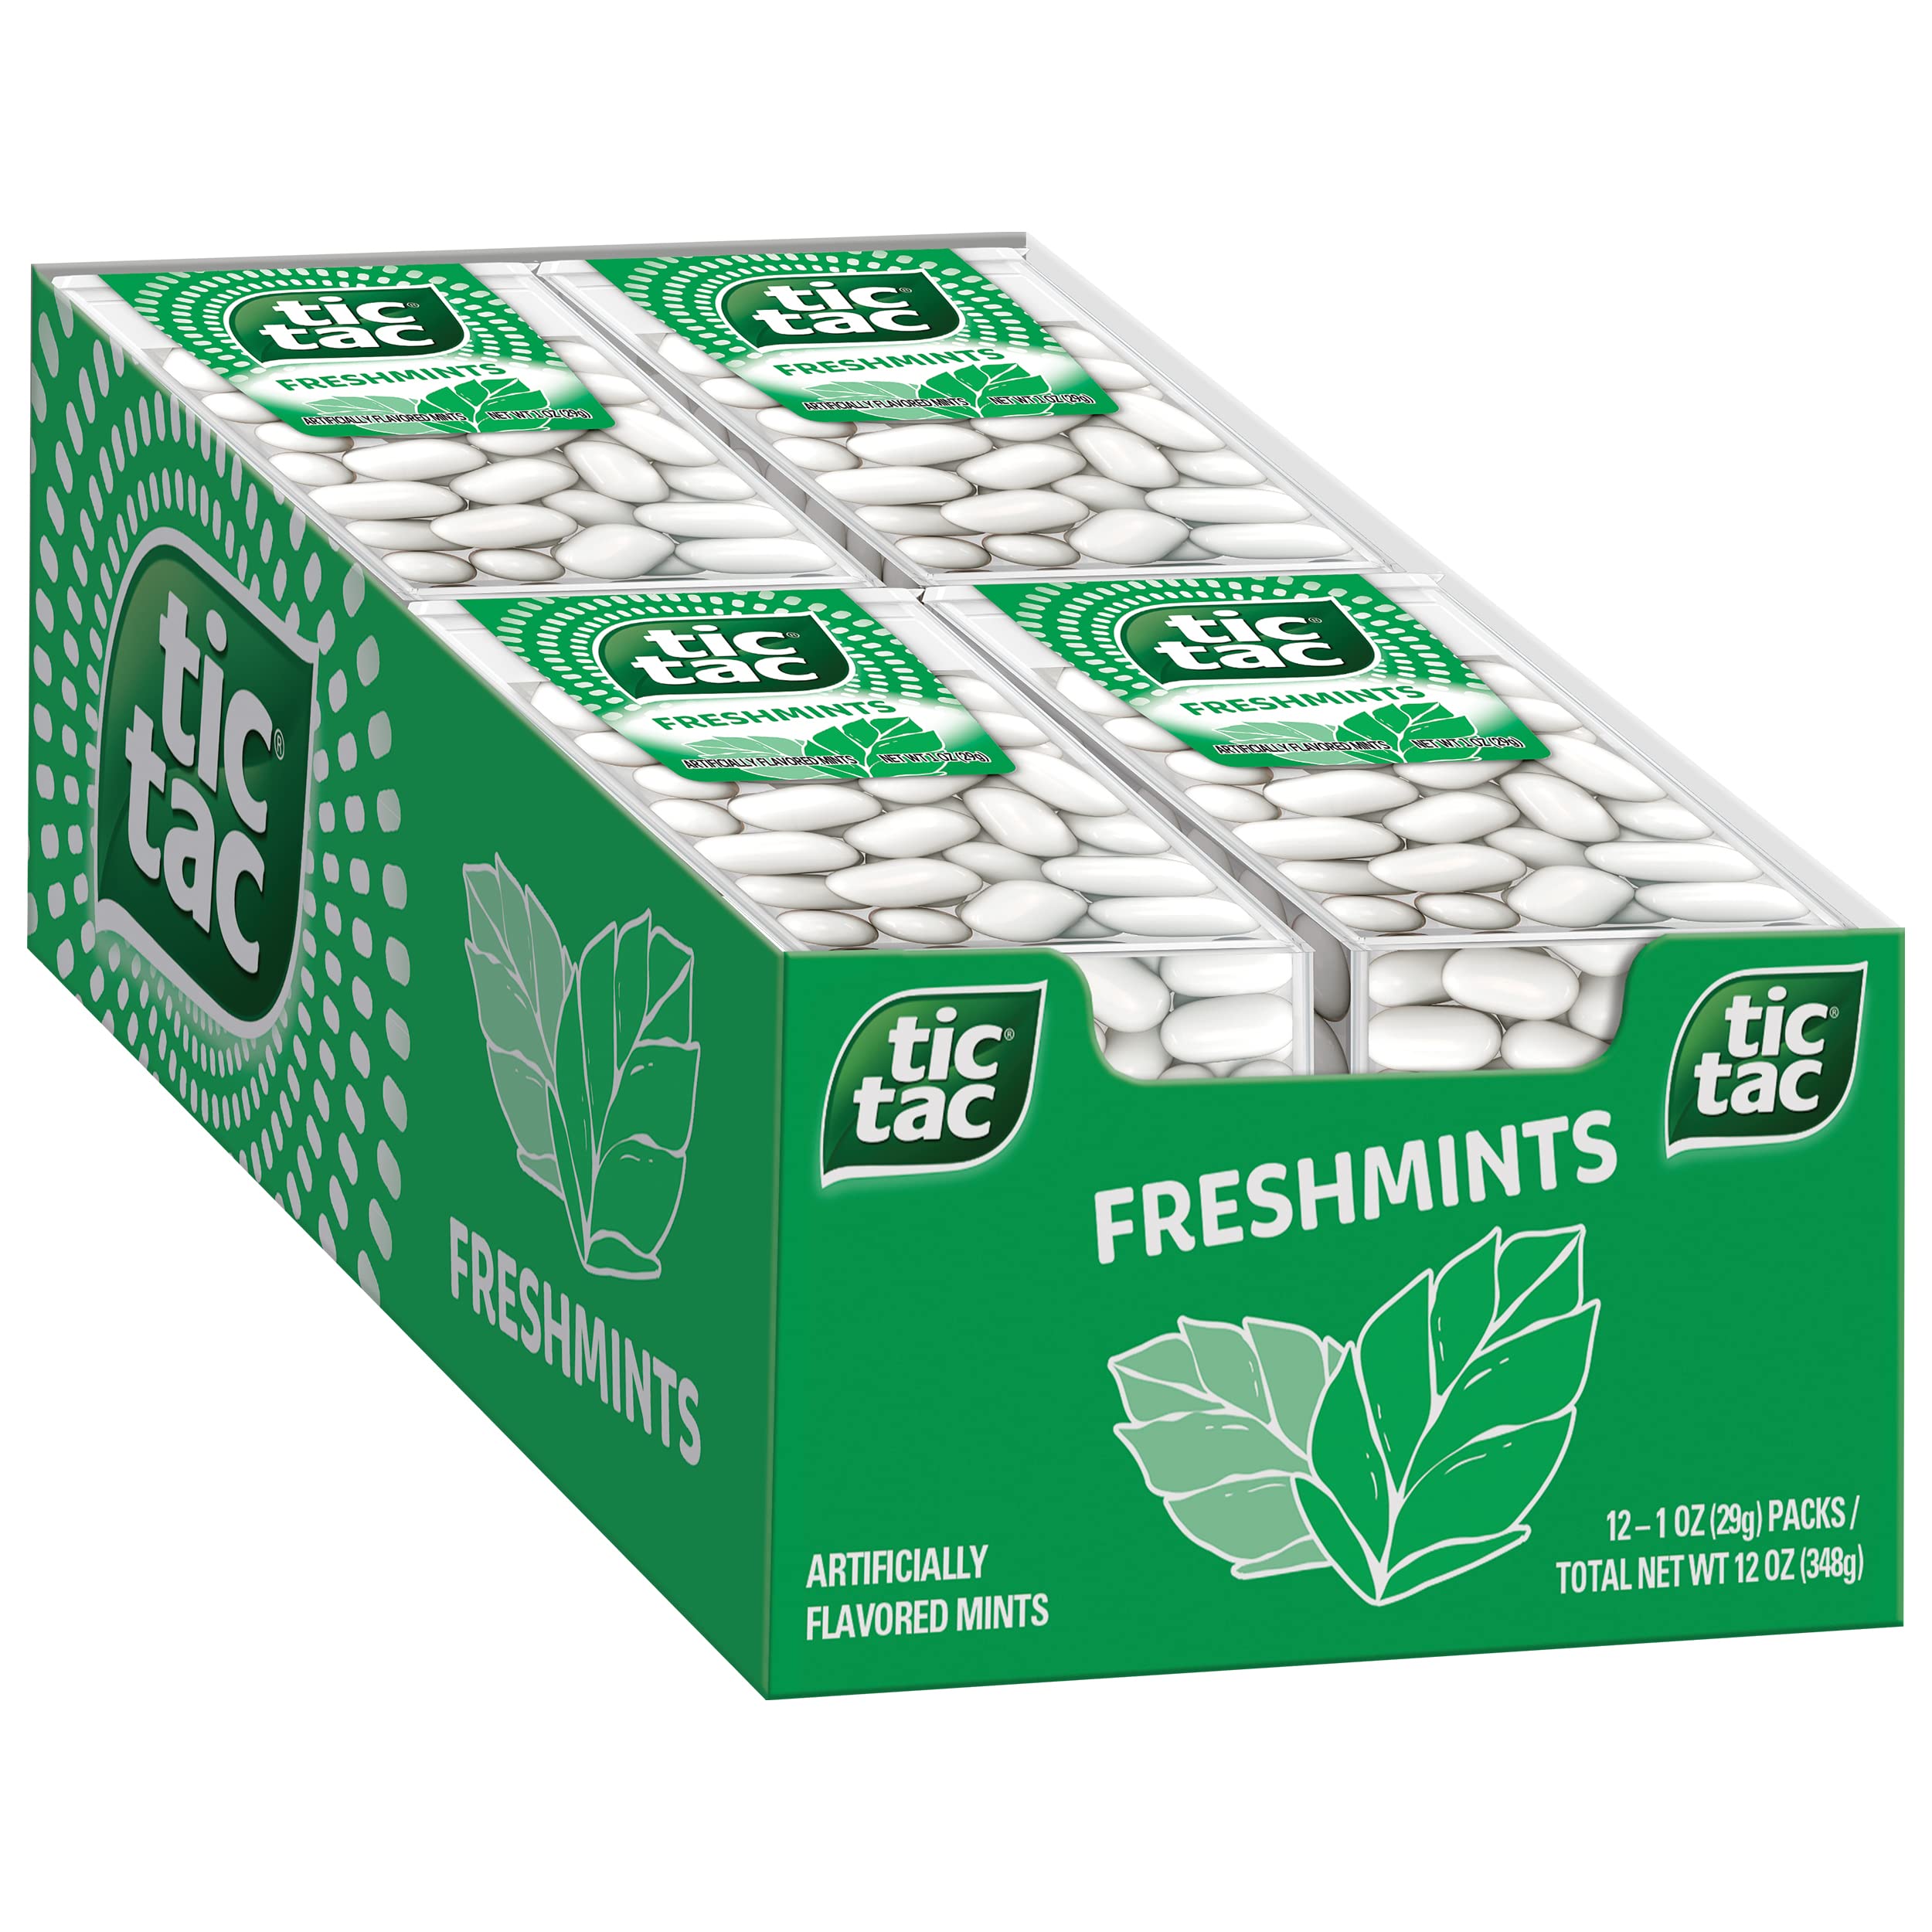 You Can Get Coca-Cola Tic Tacs And They Taste Like The Real Deal